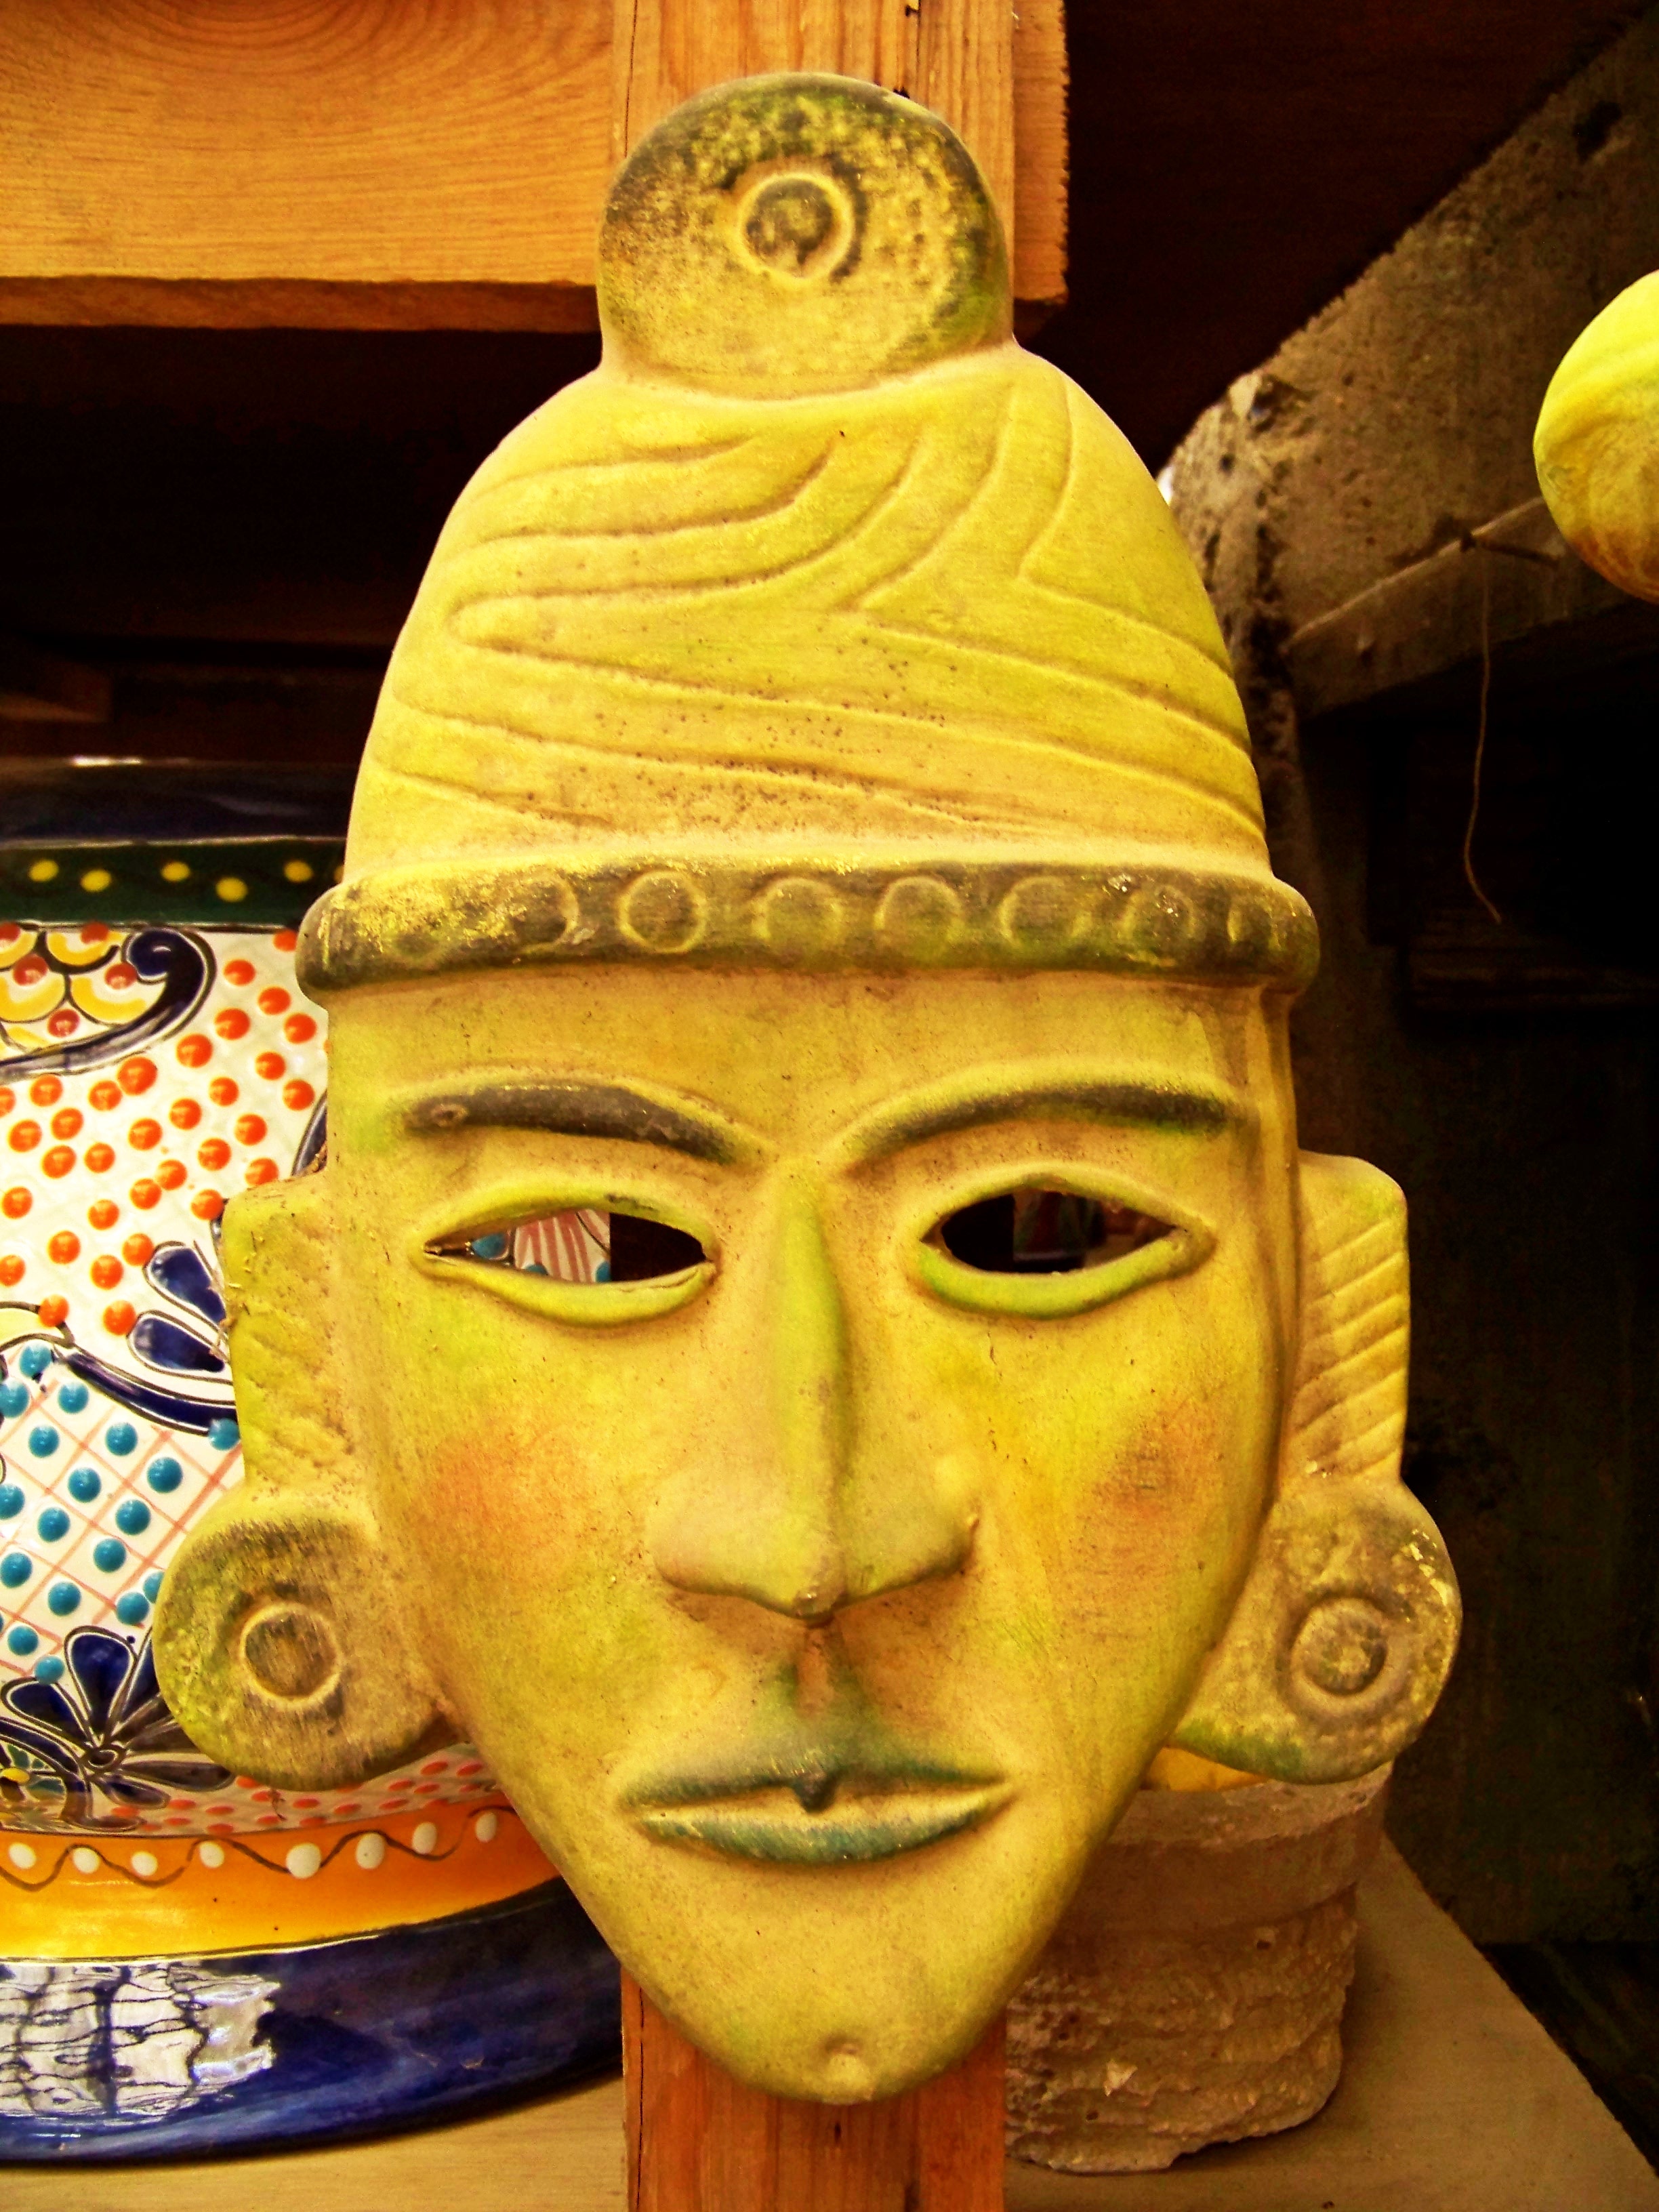 Mexican craft mask